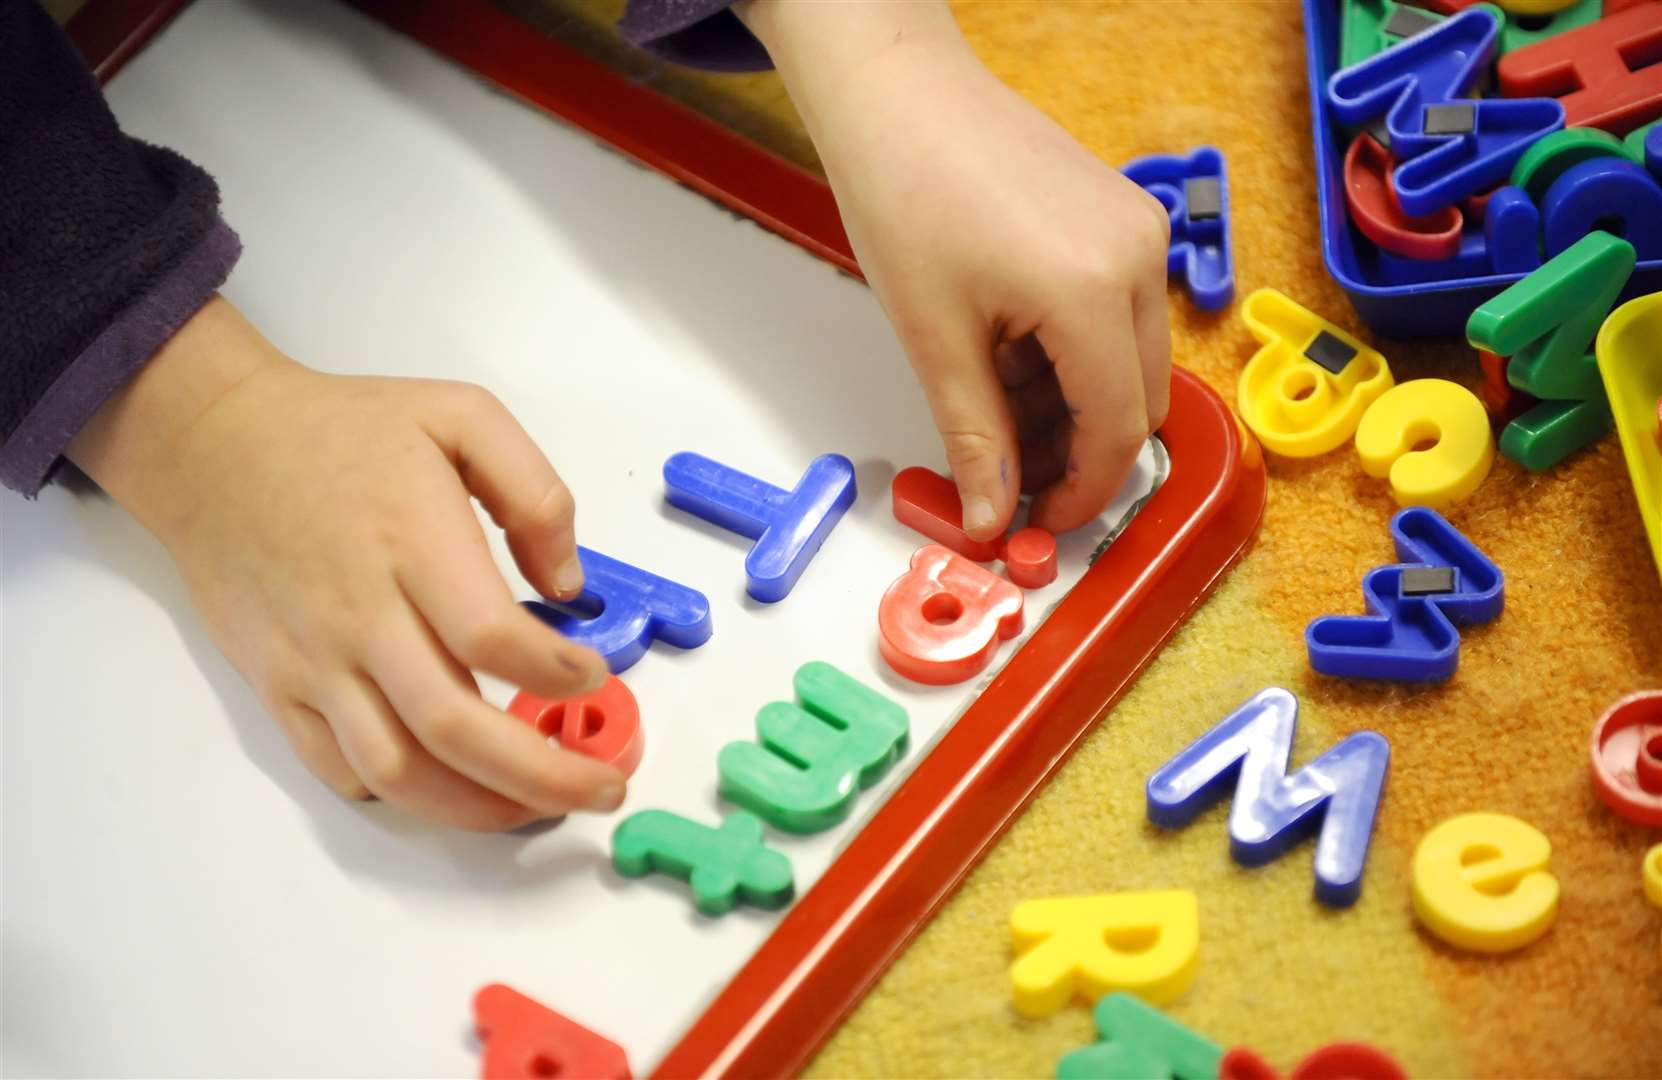 There will also be efforts to tackle expensive childcare costs in the Budget (Dominic Lipinski/PA)